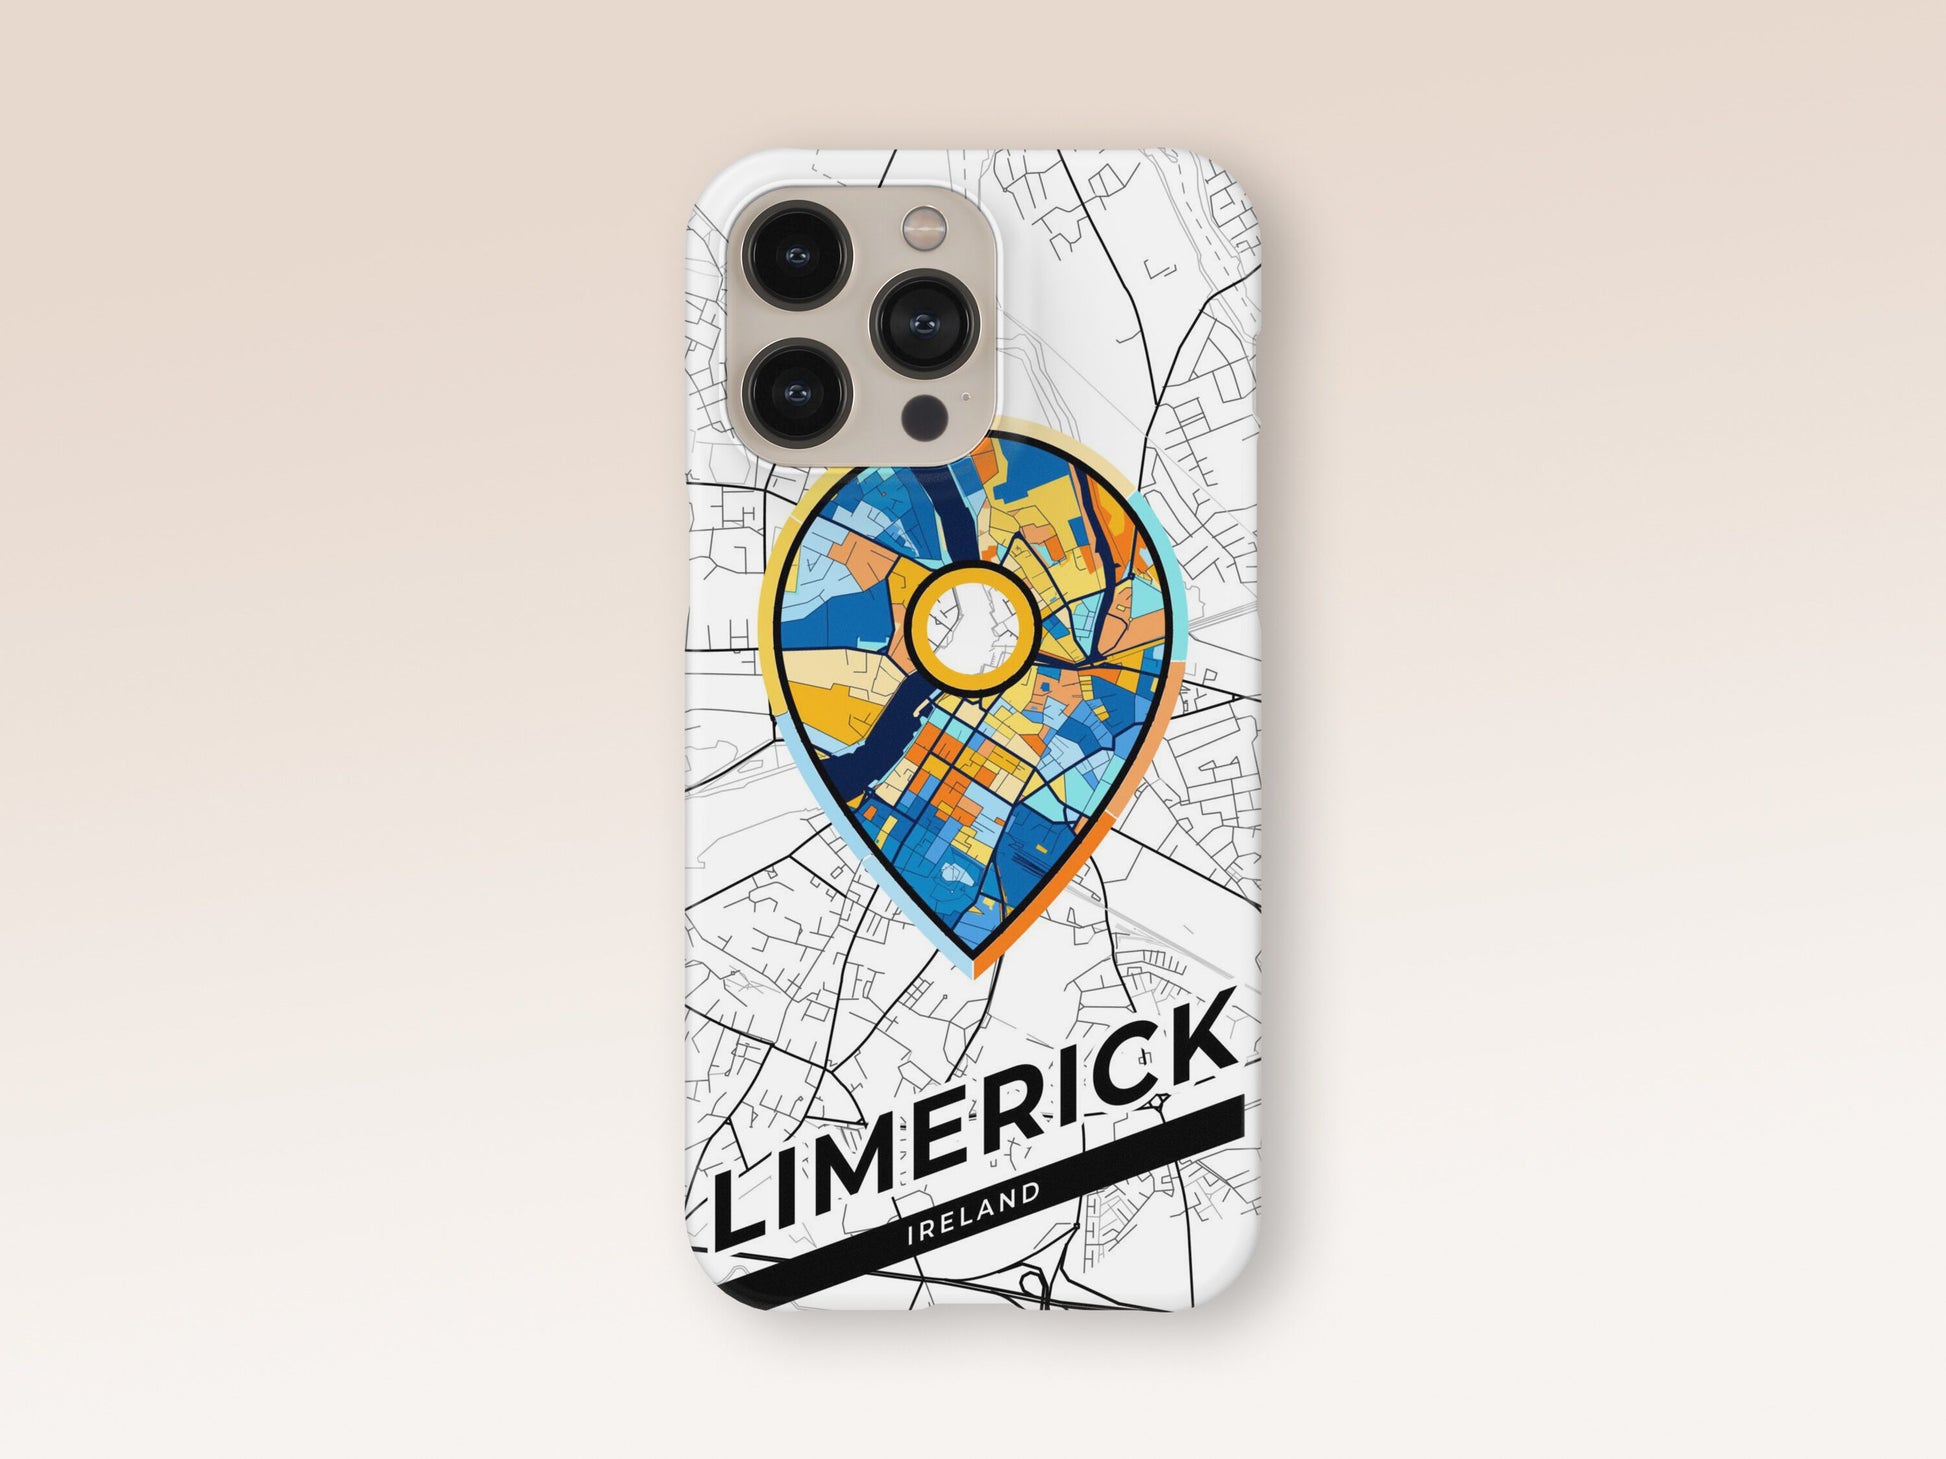 Limerick Ireland slim phone case with colorful icon. Birthday, wedding or housewarming gift. Couple match cases. 1